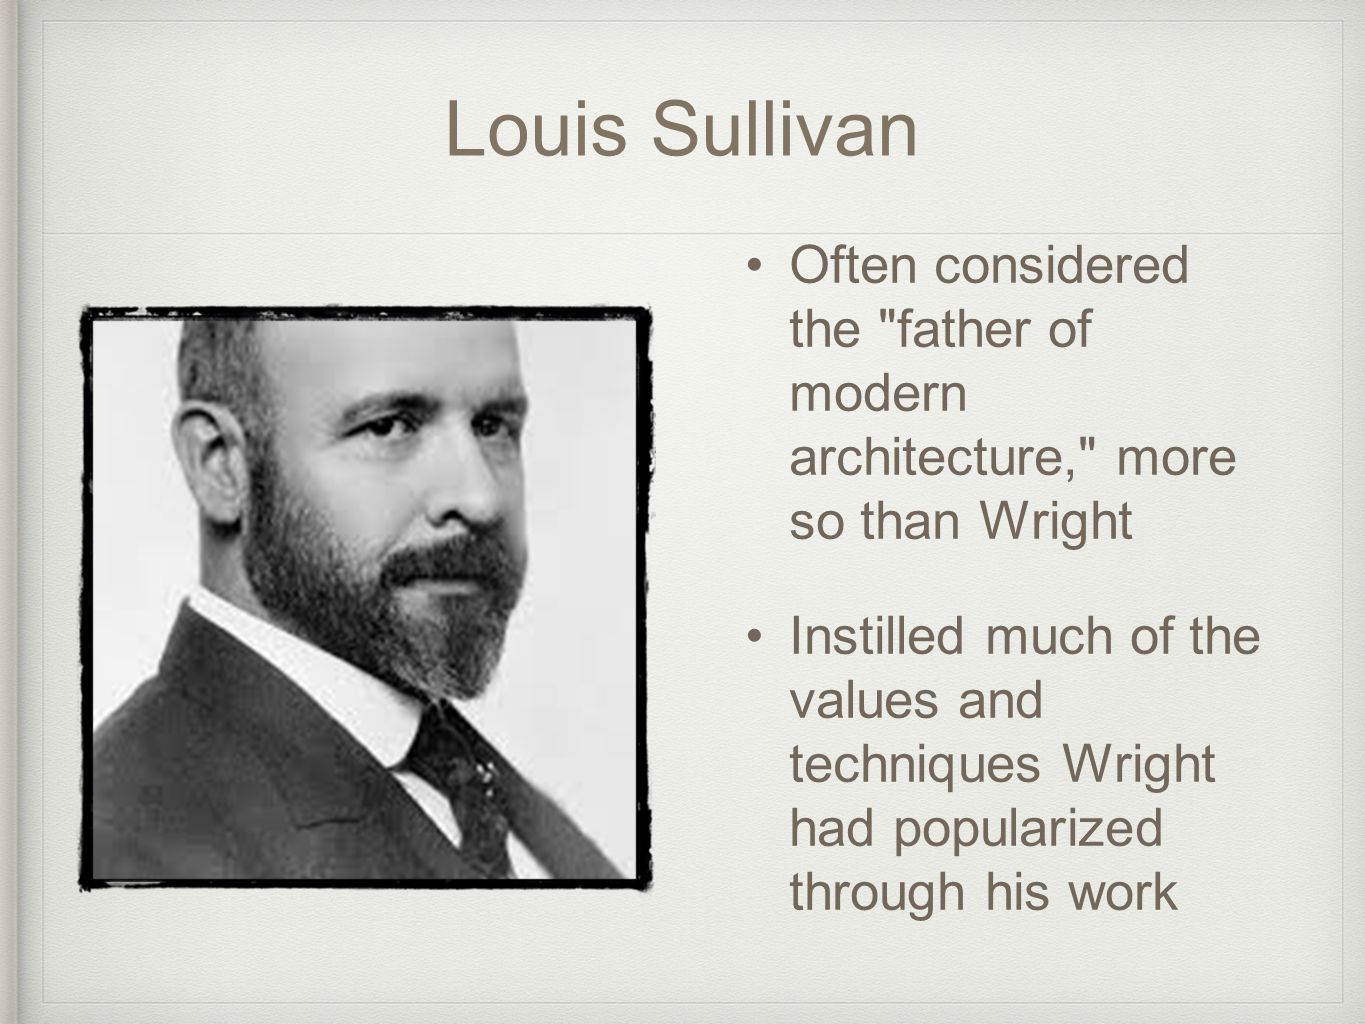 Louis Sullivan Often considered the father of modern architecture, more so than Wright.